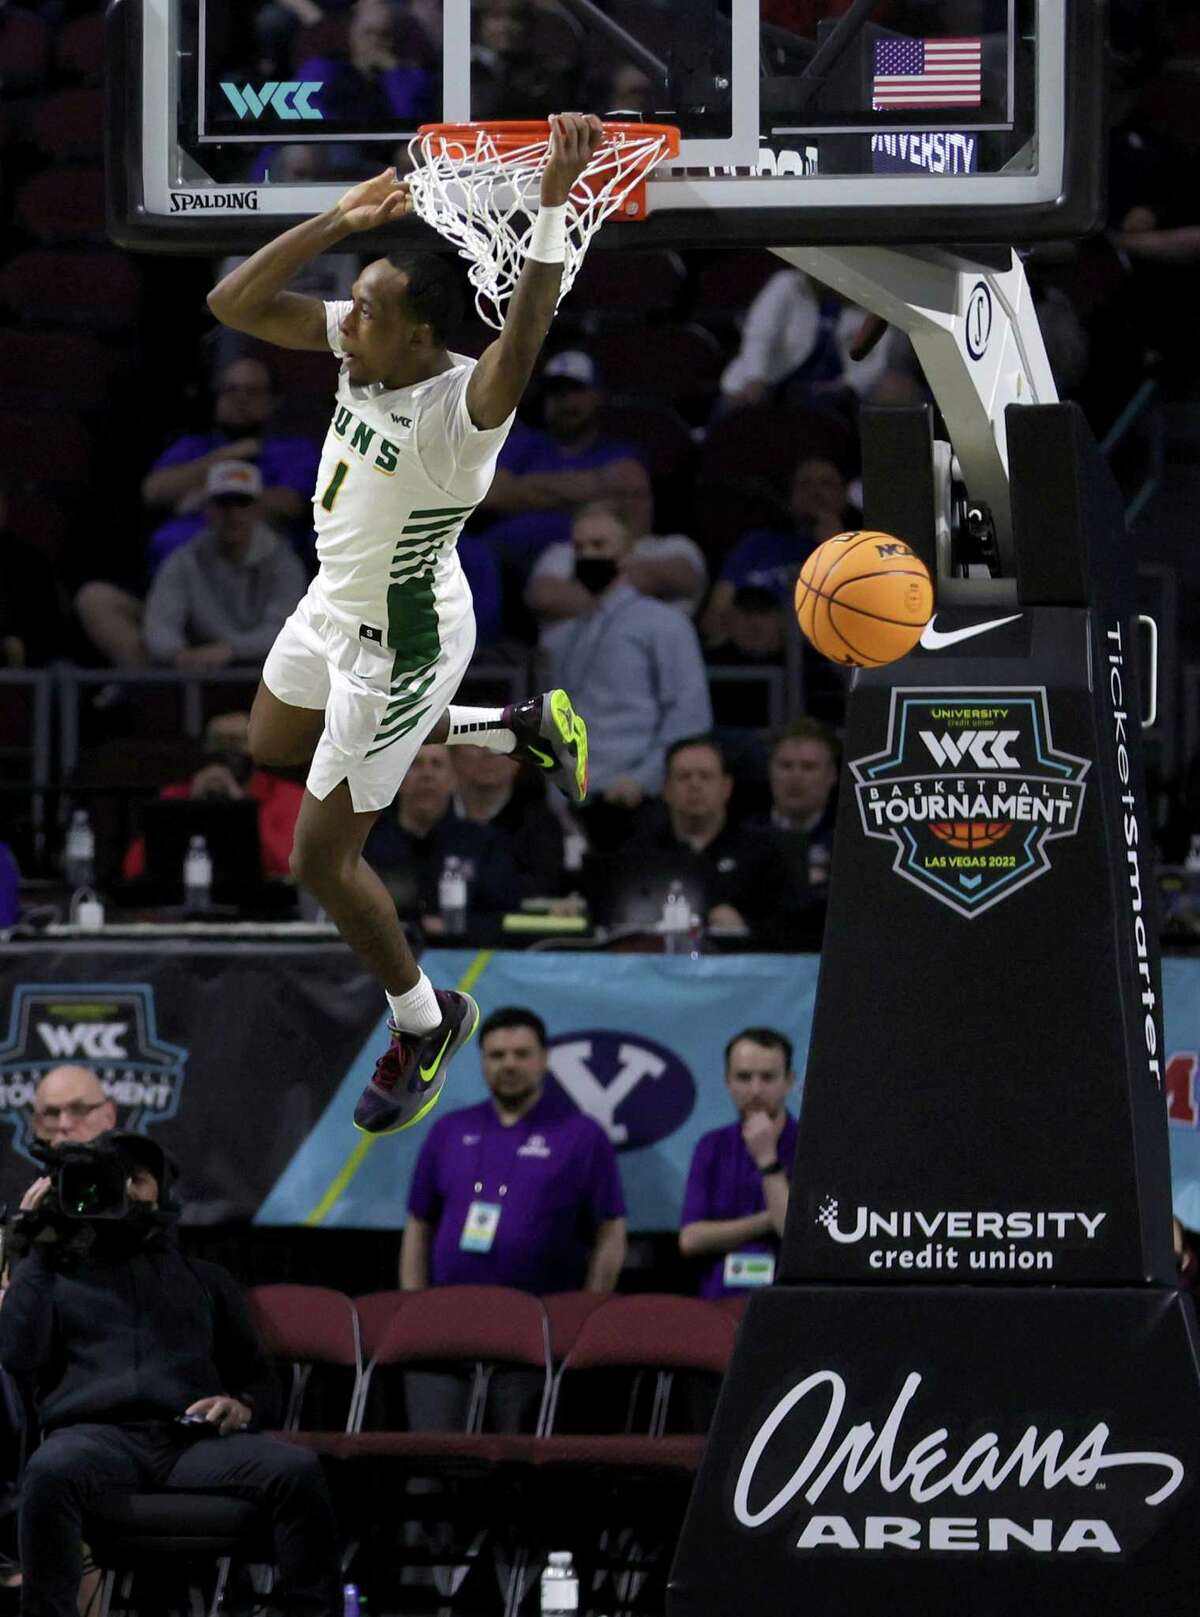 LAS VEGAS, NEVADA - MARCH 05: Jamaree Bouyea #1 of the San Francisco Dons dunks against the Brigham Young Cougars late in their game during the West Coast Conference basketball tournament quarterfinals at the Orleans Arena on March 05, 2022 in Las Vegas, Nevada. The Dons defeated the Cougars 75-63. (Photo by Ethan Miller/Getty Images)